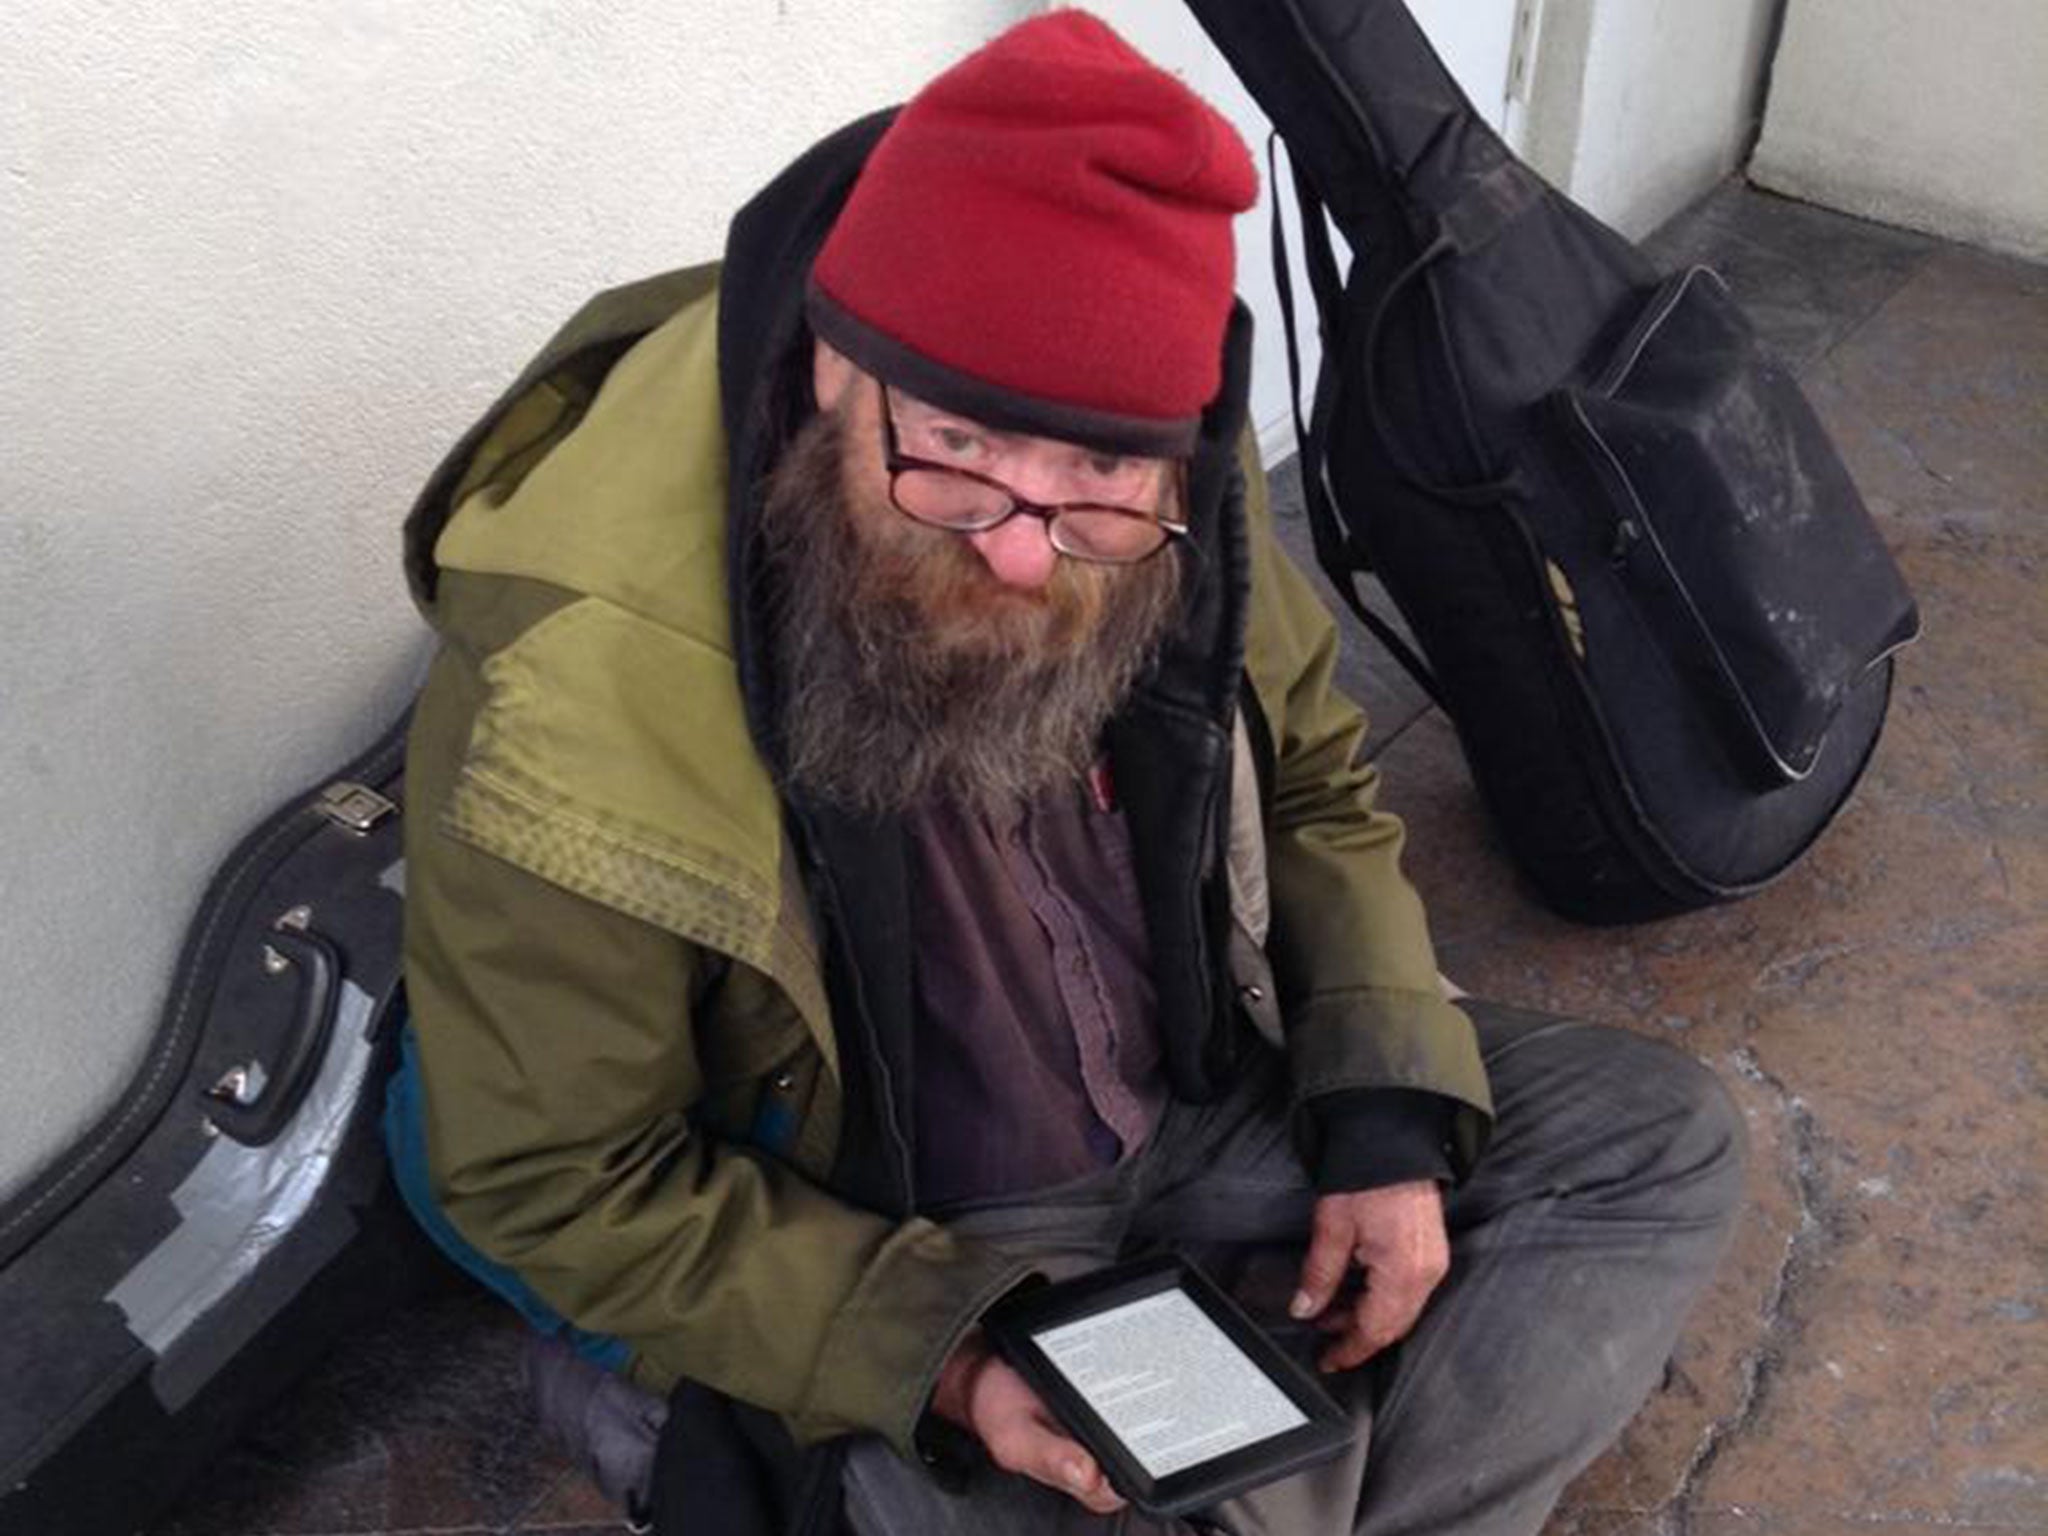 A homeless man named Paul holds the Kindle a stranger gave him